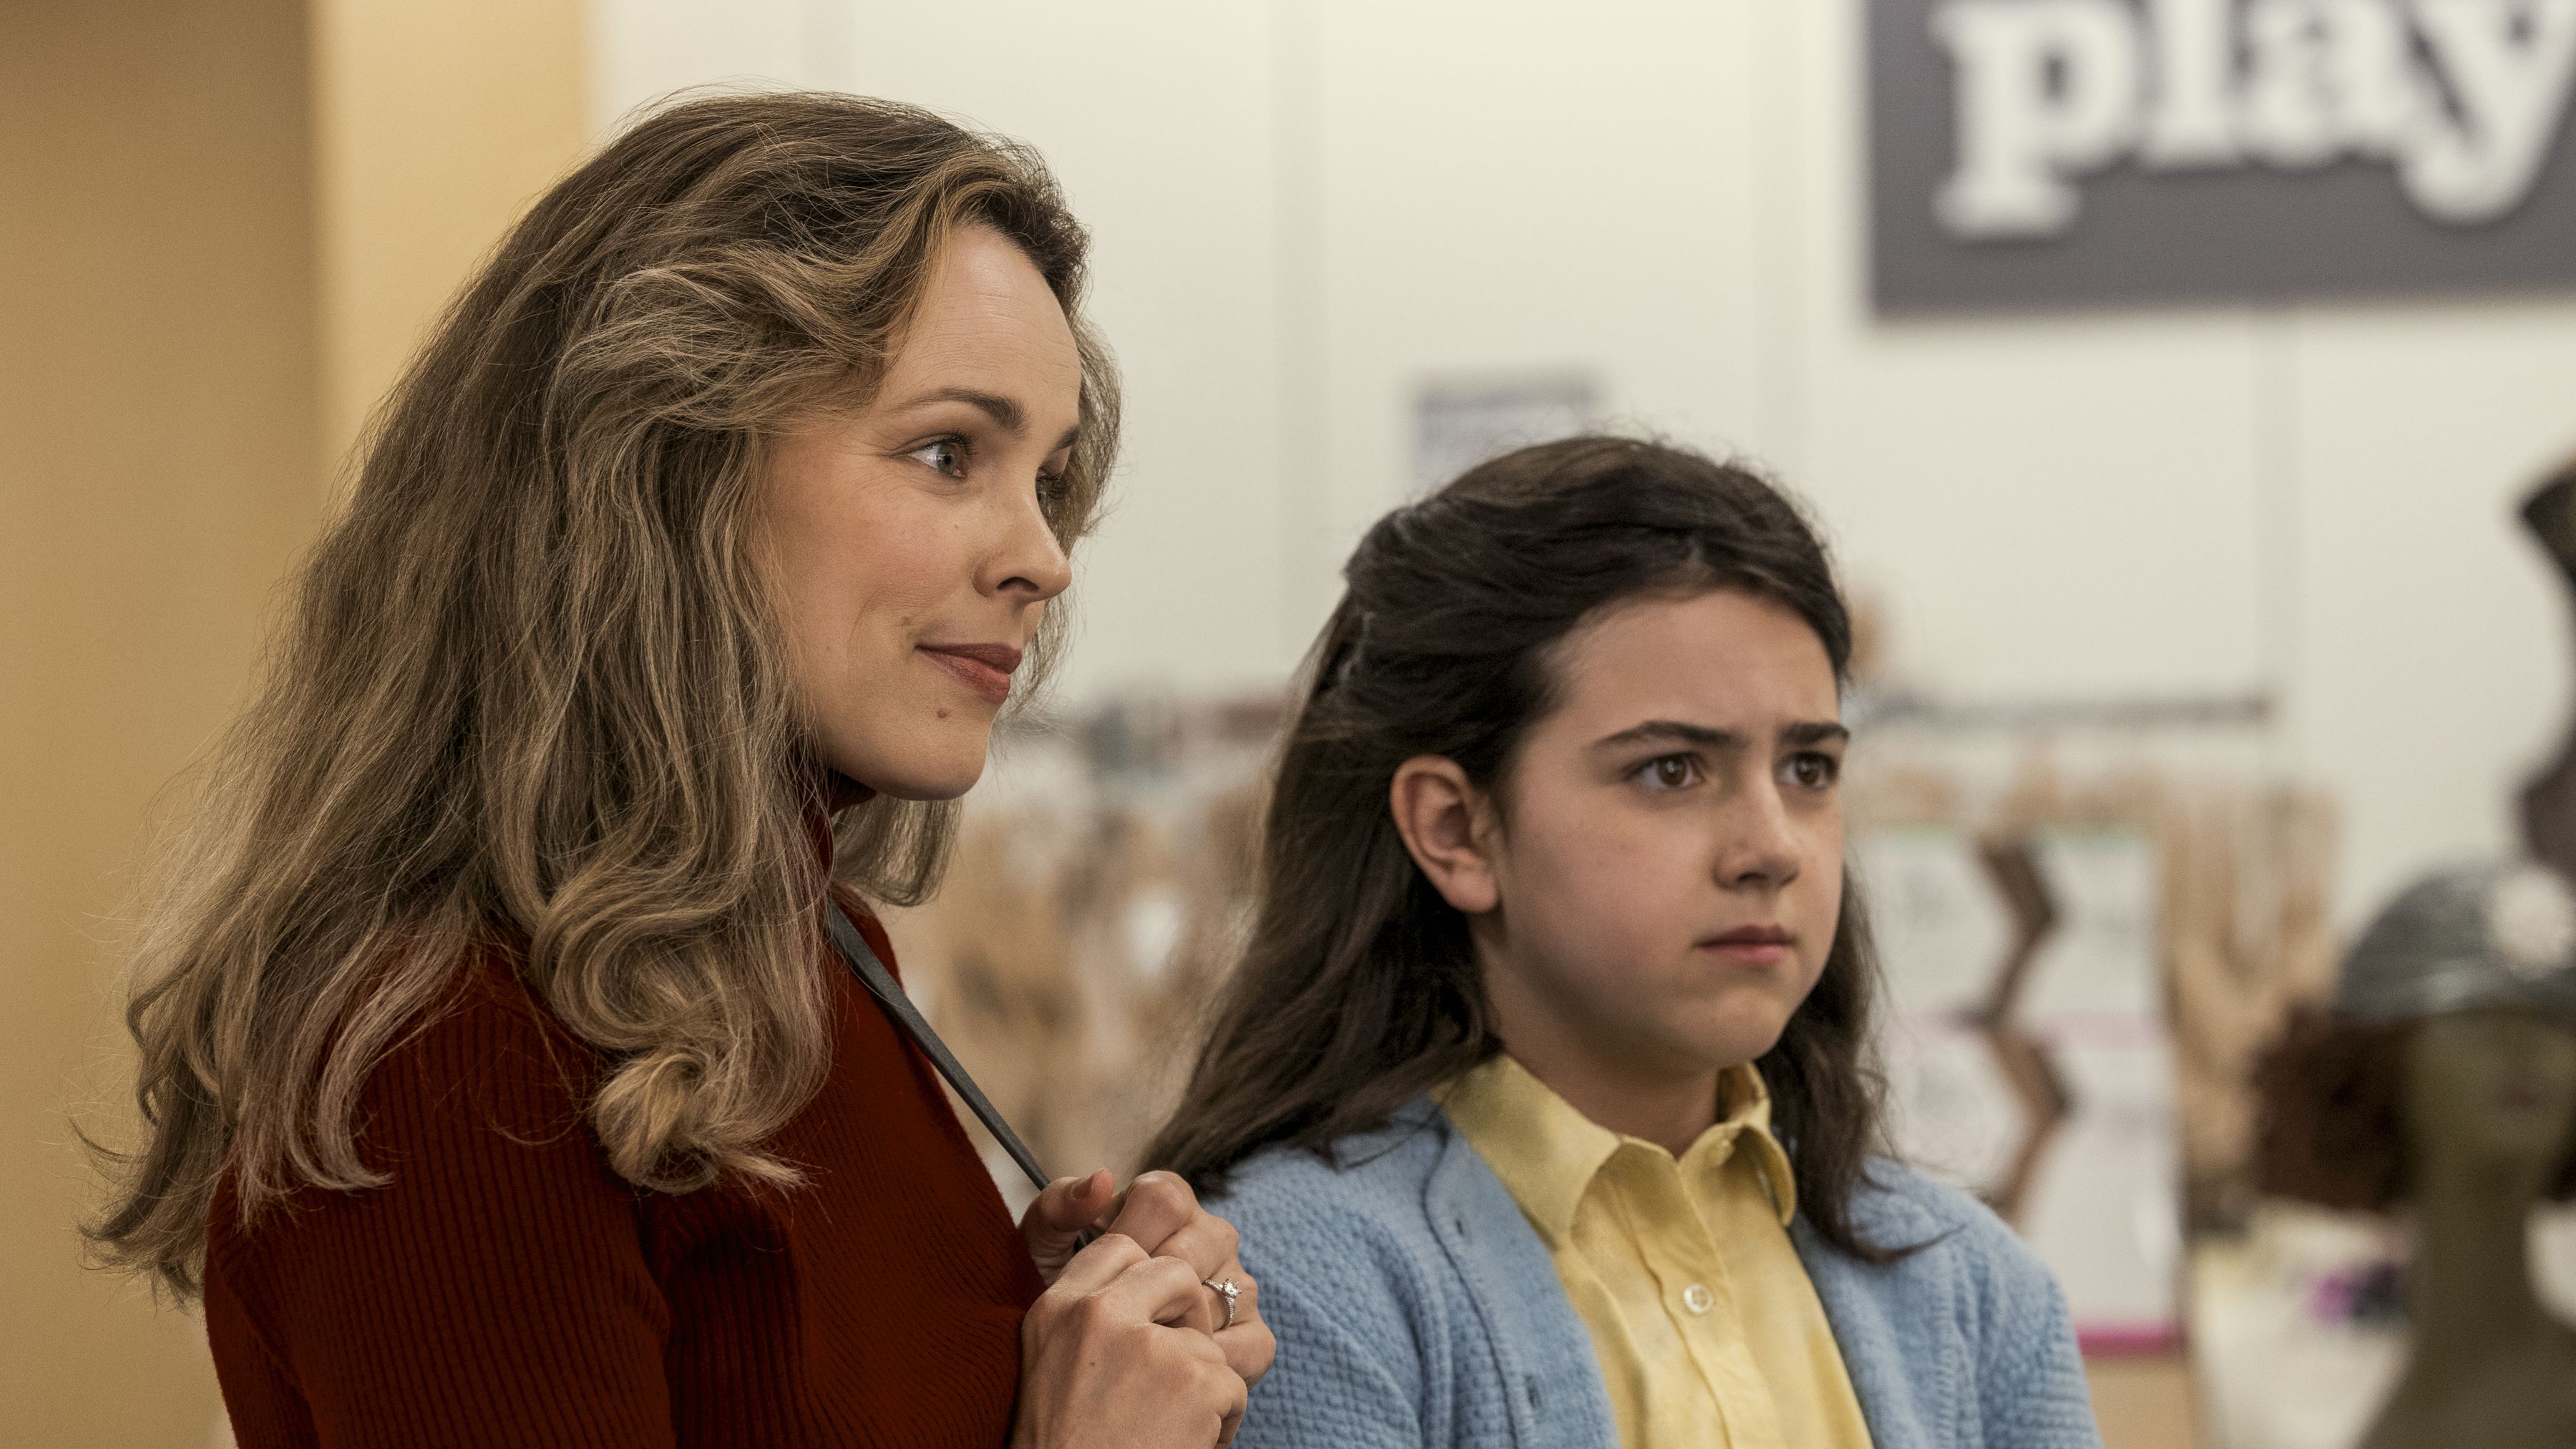 Are You There God? It's Me, Margaret Movie News, Premiere Date